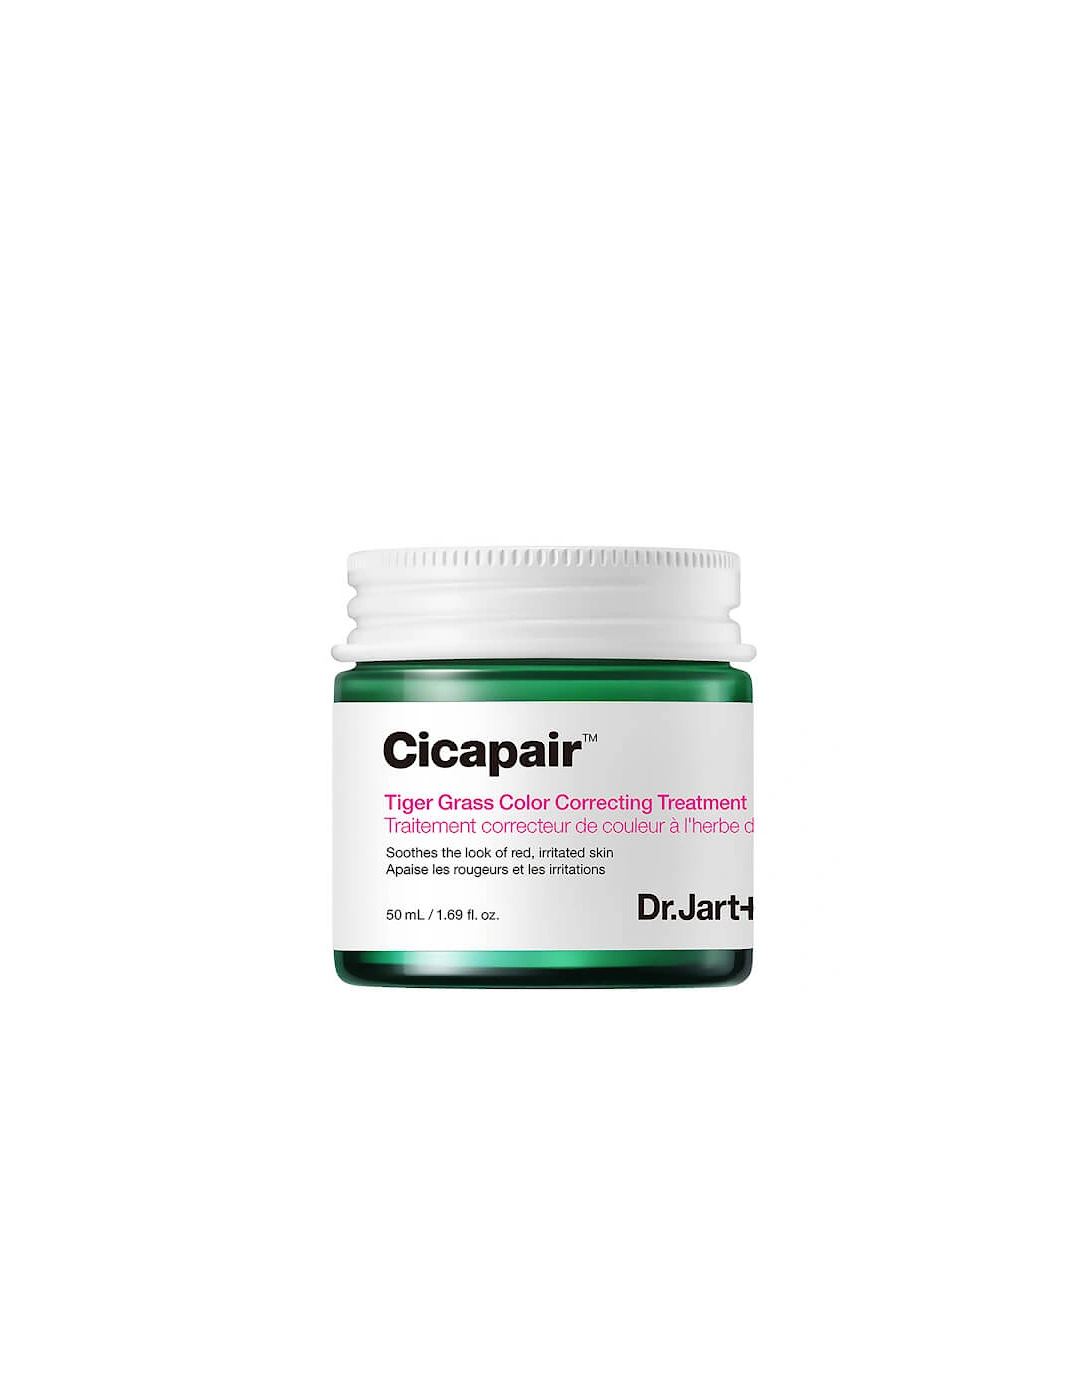 Dr. Jart+ Cicapair Tiger Grass Color Correcting Treatment 50ml, 2 of 1